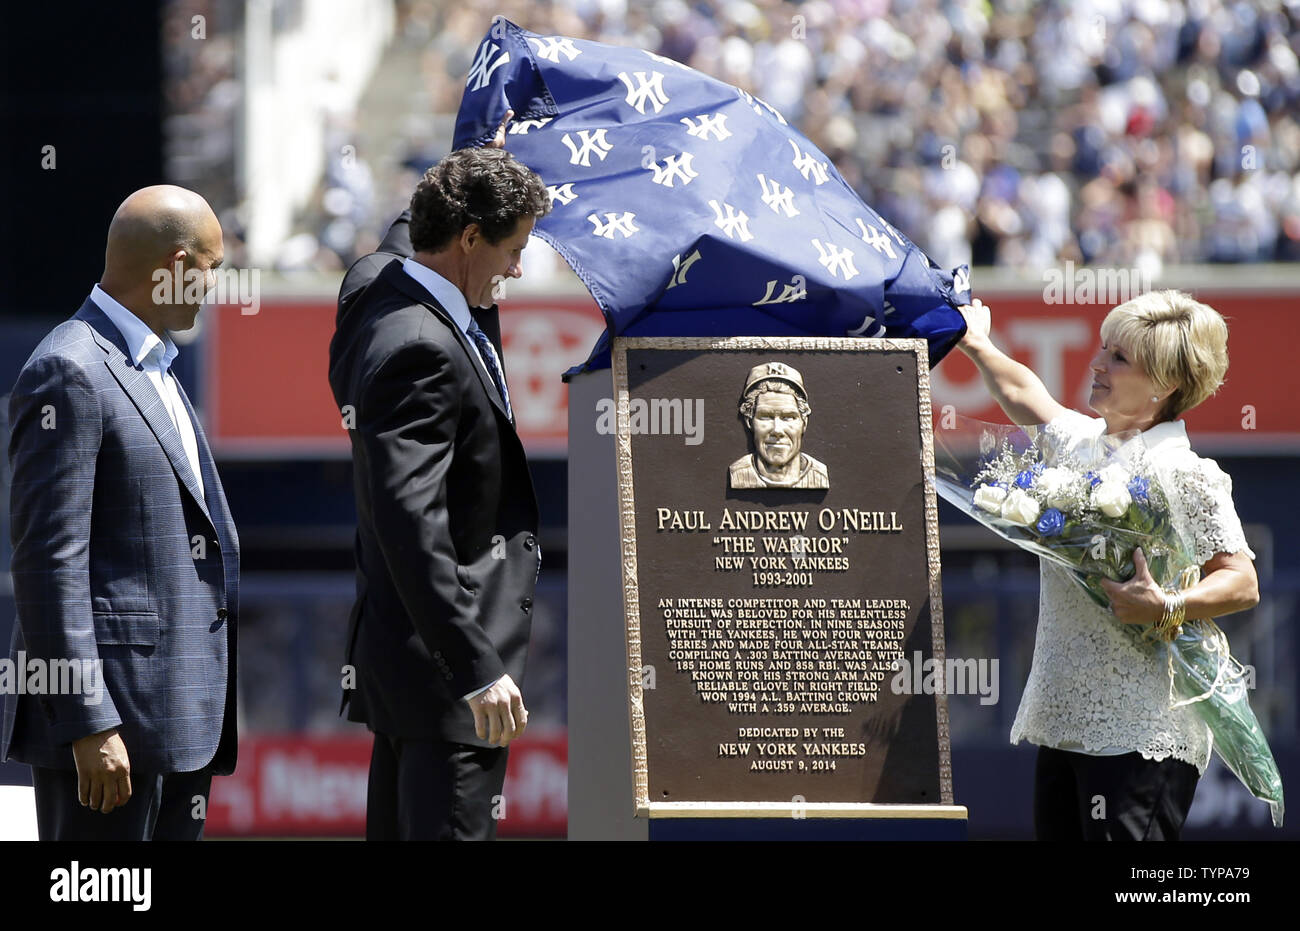 Retired New York Yankees players Mariano Rivera watches Paul O'Neill and his wife Nevalee unveil a plaque at a ceremony inducting O'Neill into Monument Park before the game against the Cleveland Indians at Yankee Stadium in New York City on August 9, 2014. Monument Park is an open-air museum located at the new Yankee Stadium containing a collection of monuments, plaques, and retired numbers honoring distinguished members of the New York Yankees.    UPI/John Angelillo Stock Photo